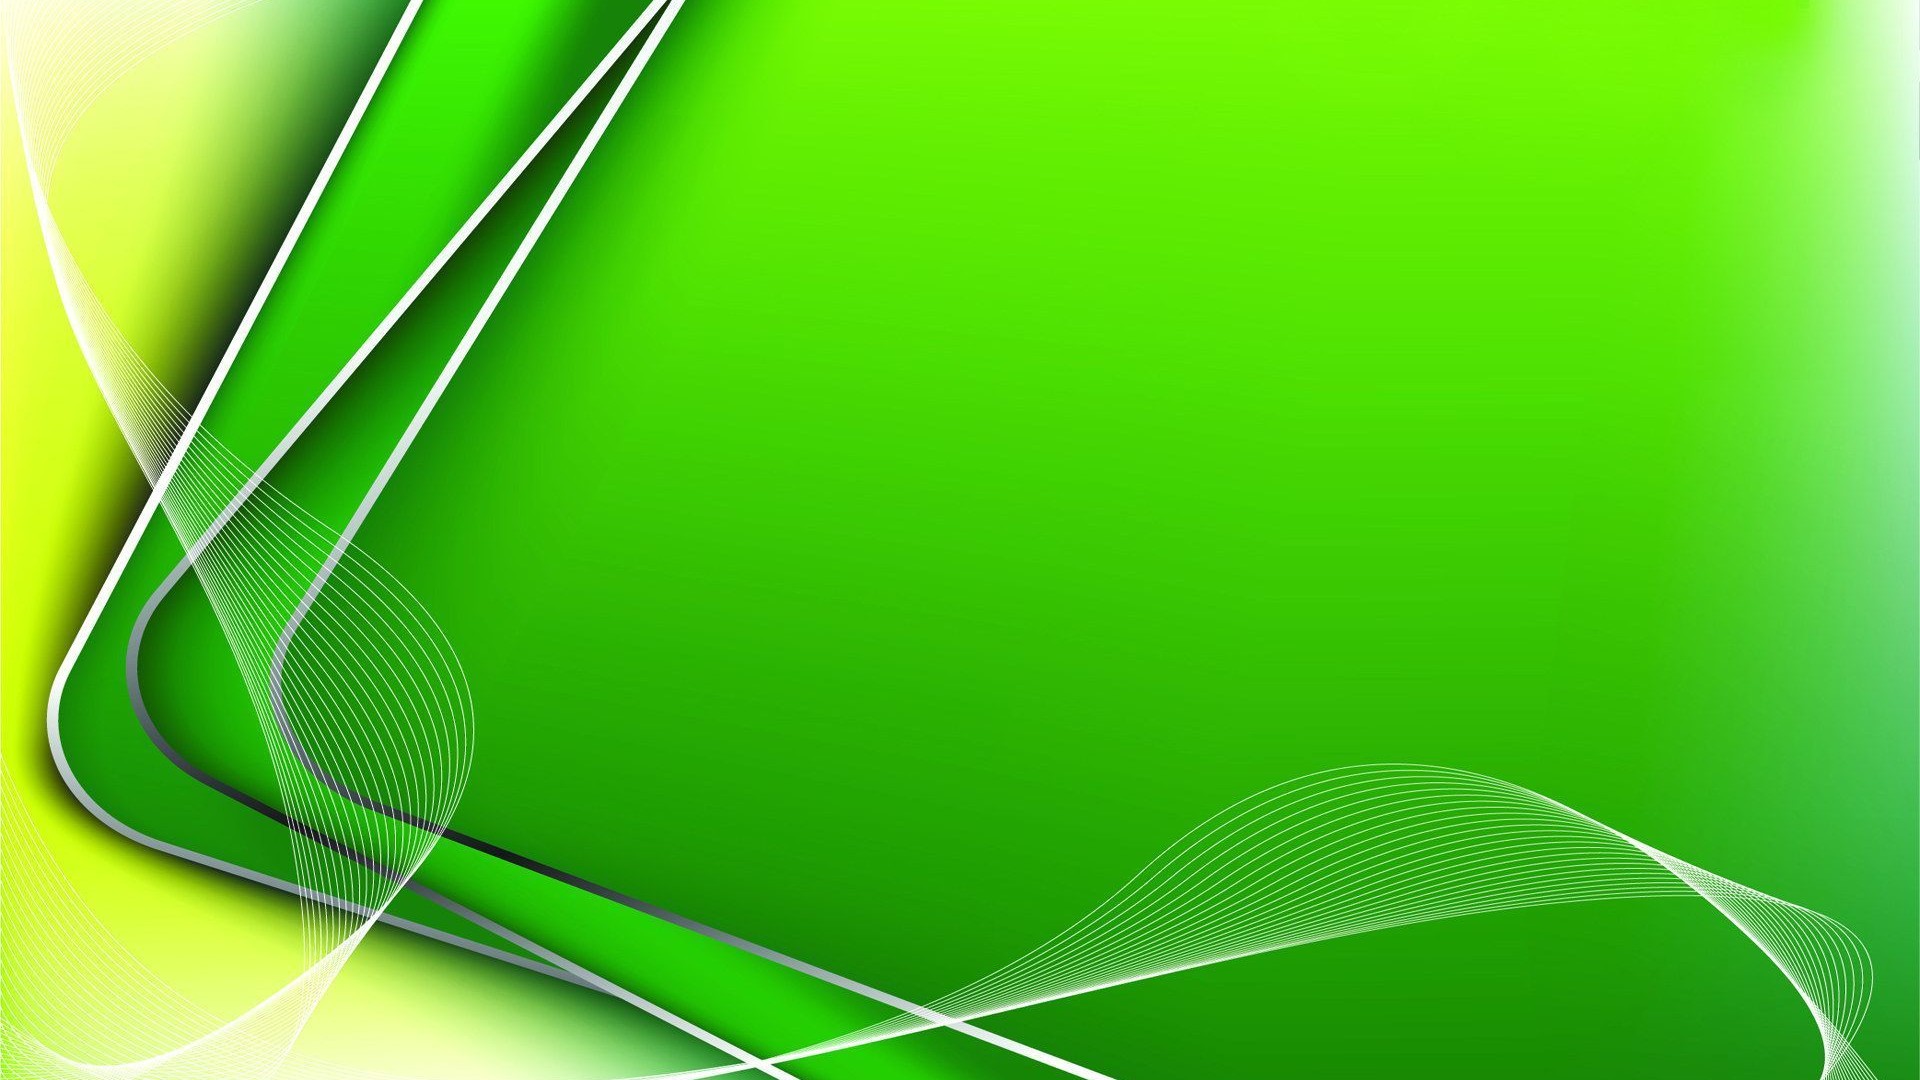 Lime Green HD Backgrounds with image resolution 1920x1080 pixel. You can make this wallpaper for your Desktop Computer Backgrounds, Mac Wallpapers, Android Lock screen or iPhone Screensavers